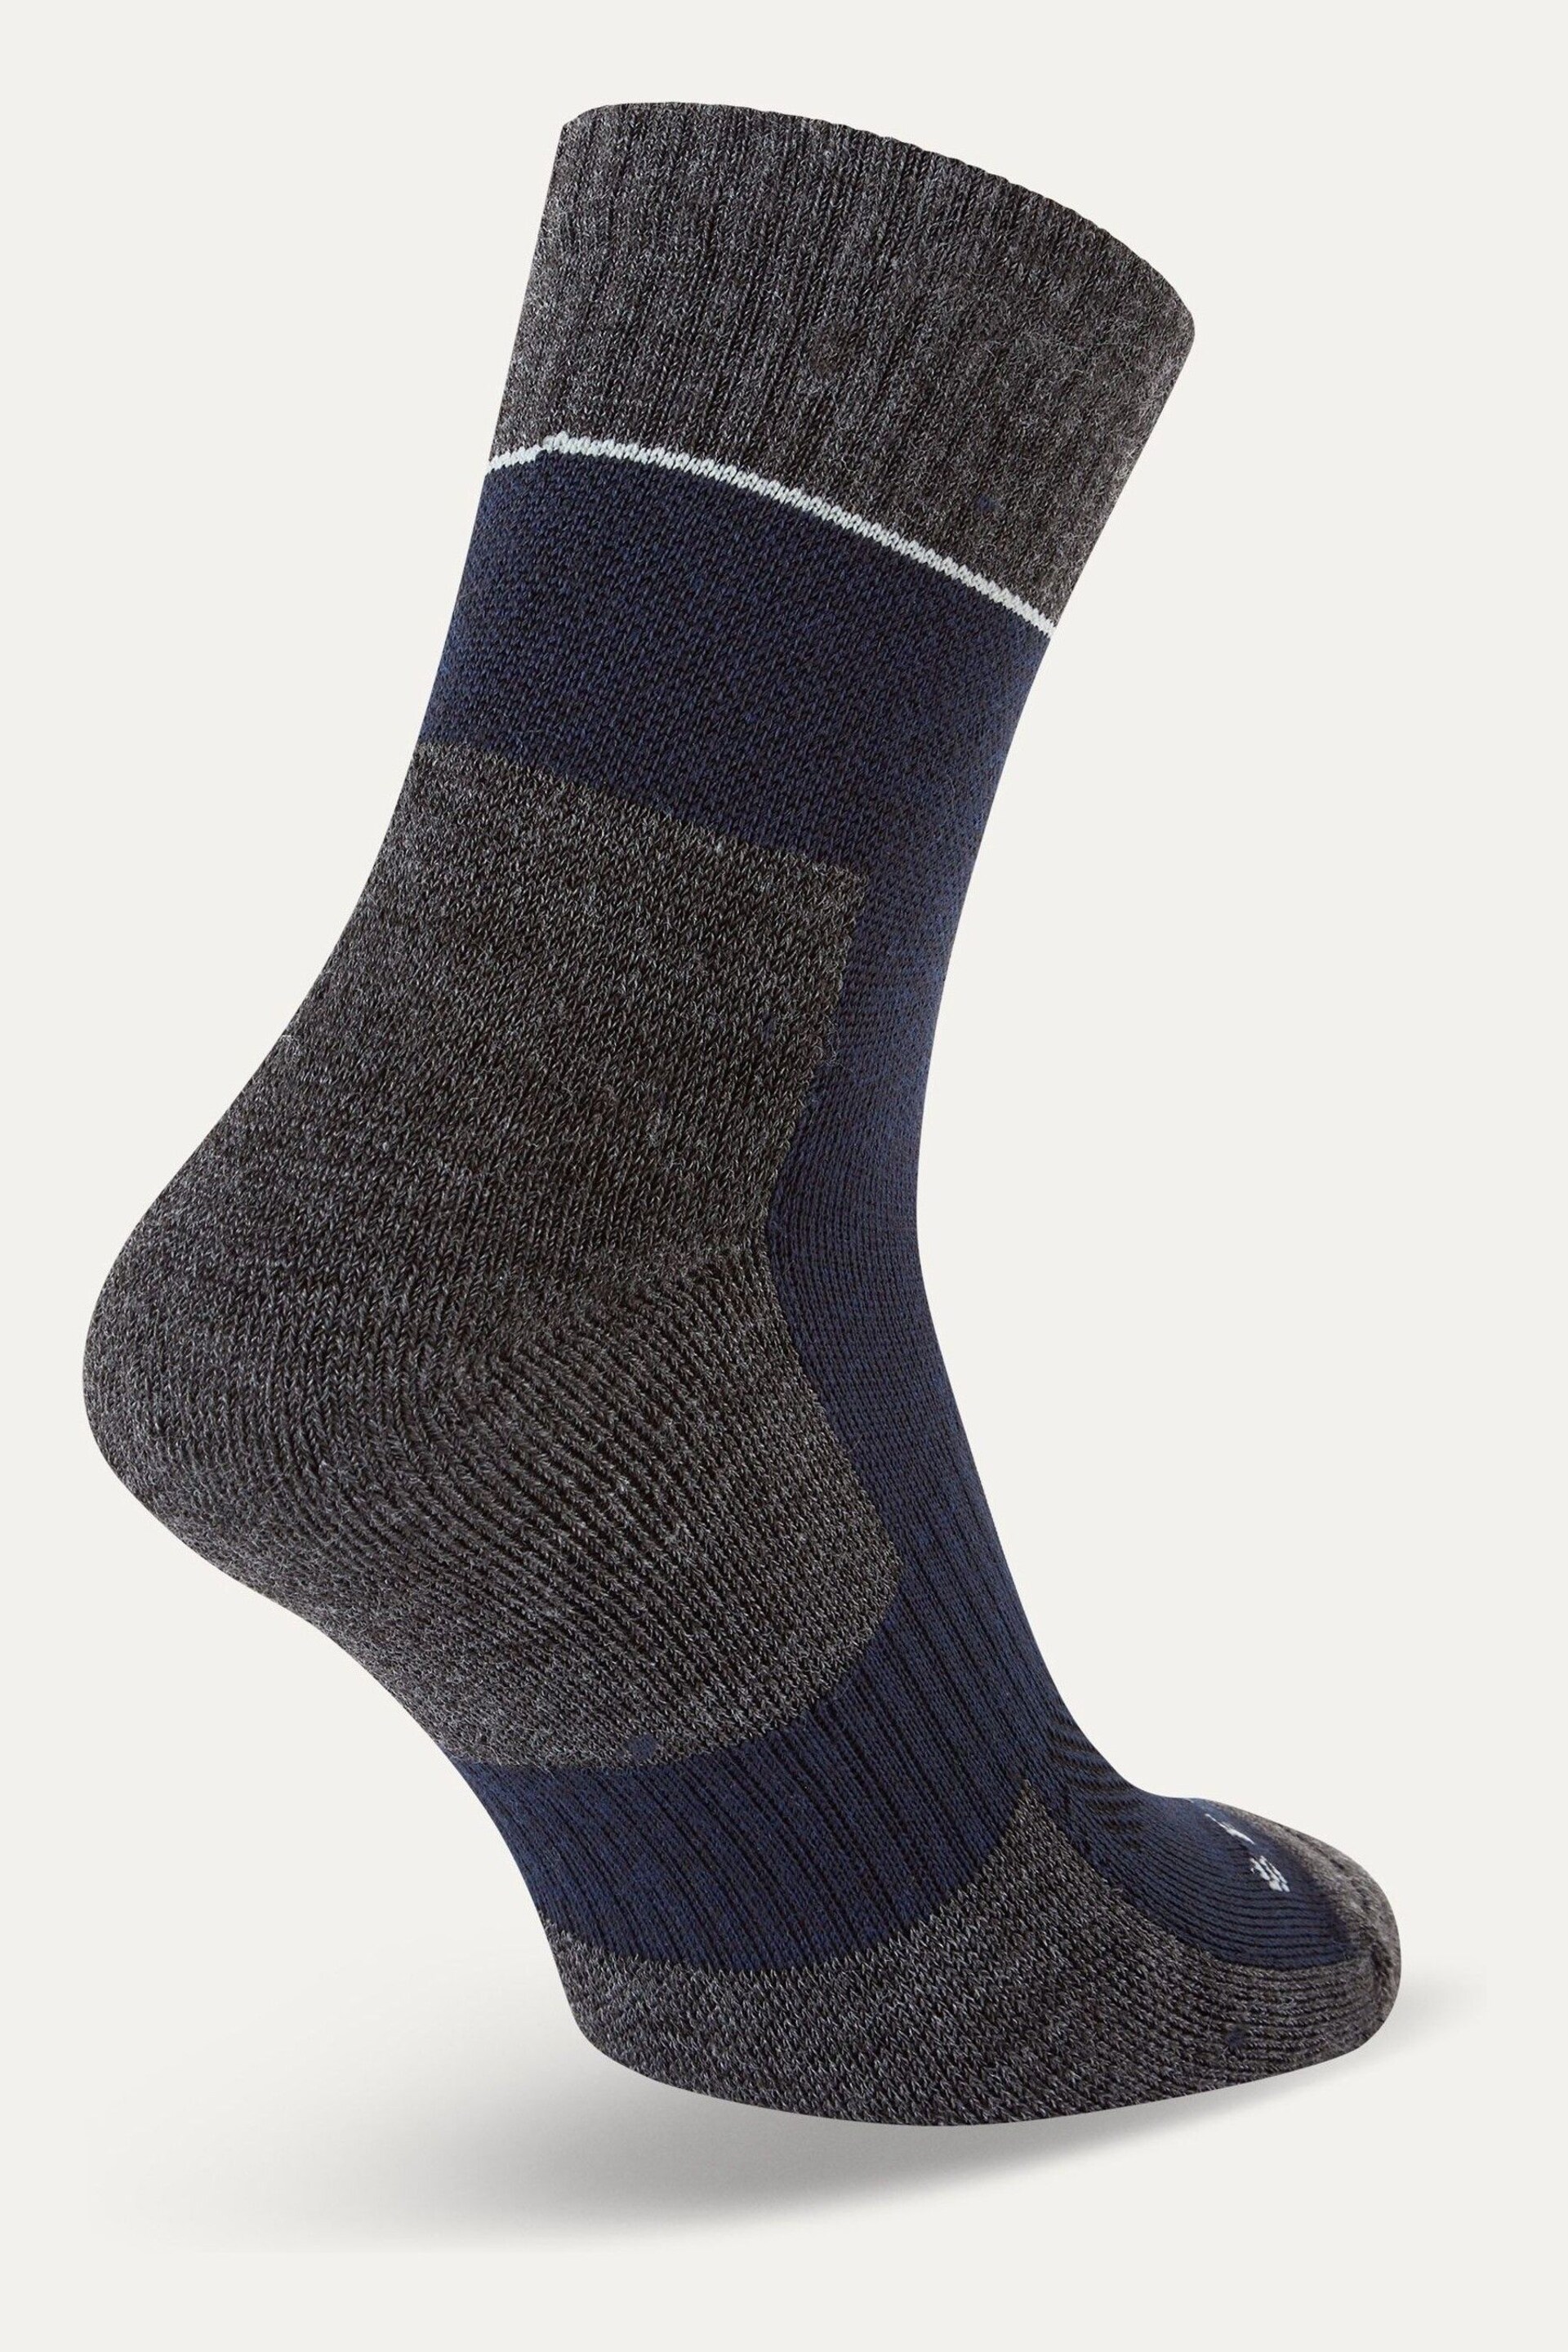 Sealskinz Morston Non-Waterproof Quickdry Ankle Length Socks - Image 2 of 2